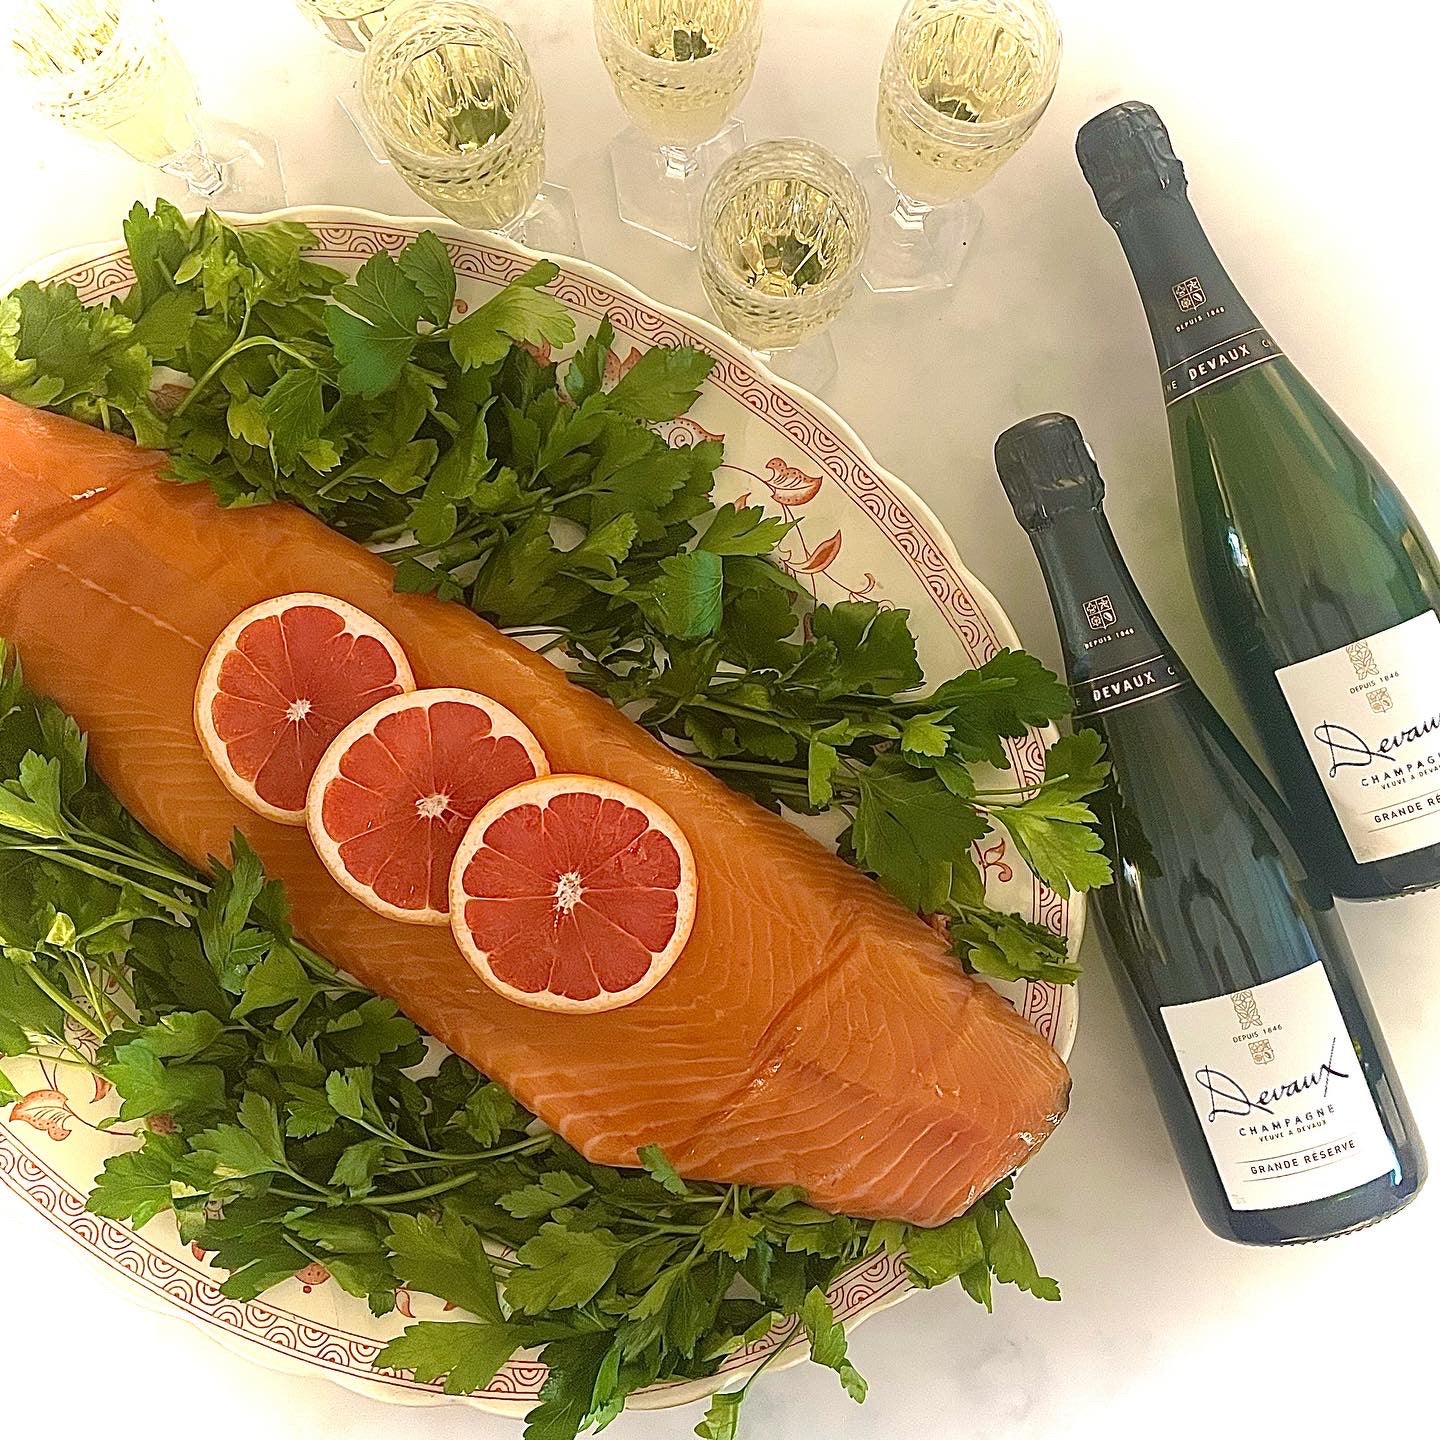 Whole Side of Smoked Salmon and Two Bottles of Devaux Grande Reserve Blanc de Blancs Champagne